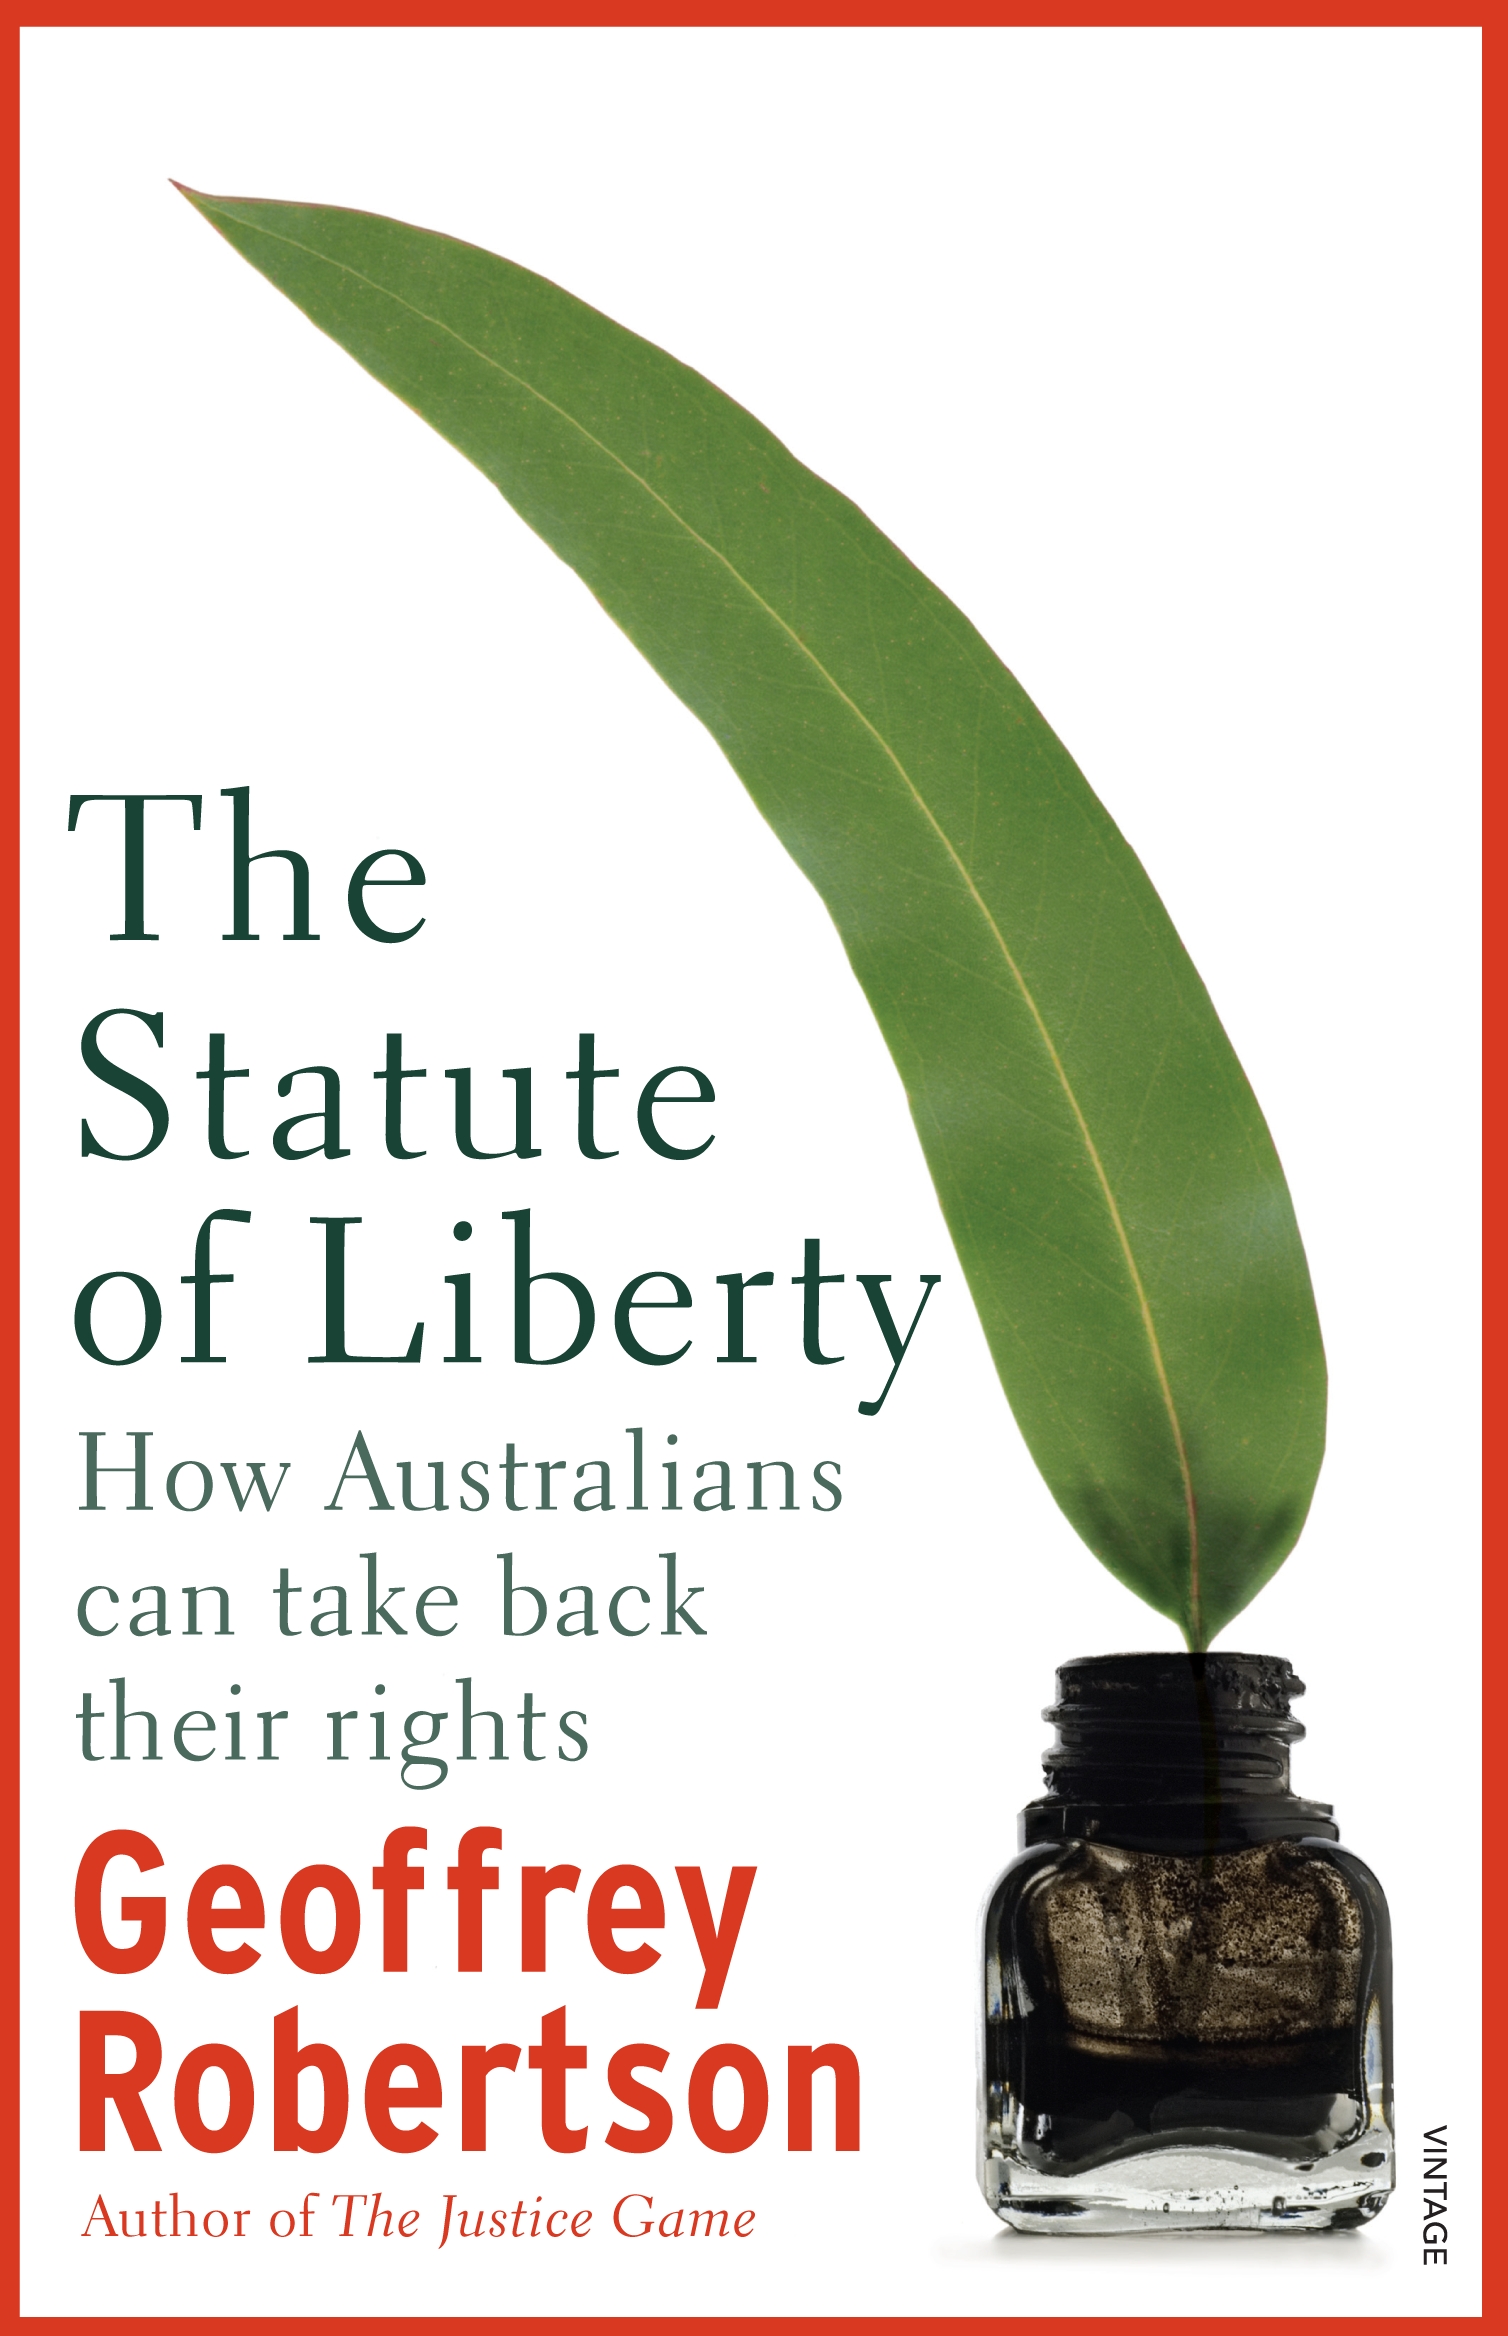 The Statue of Liberty: How Australians Can Take Back Their Rights